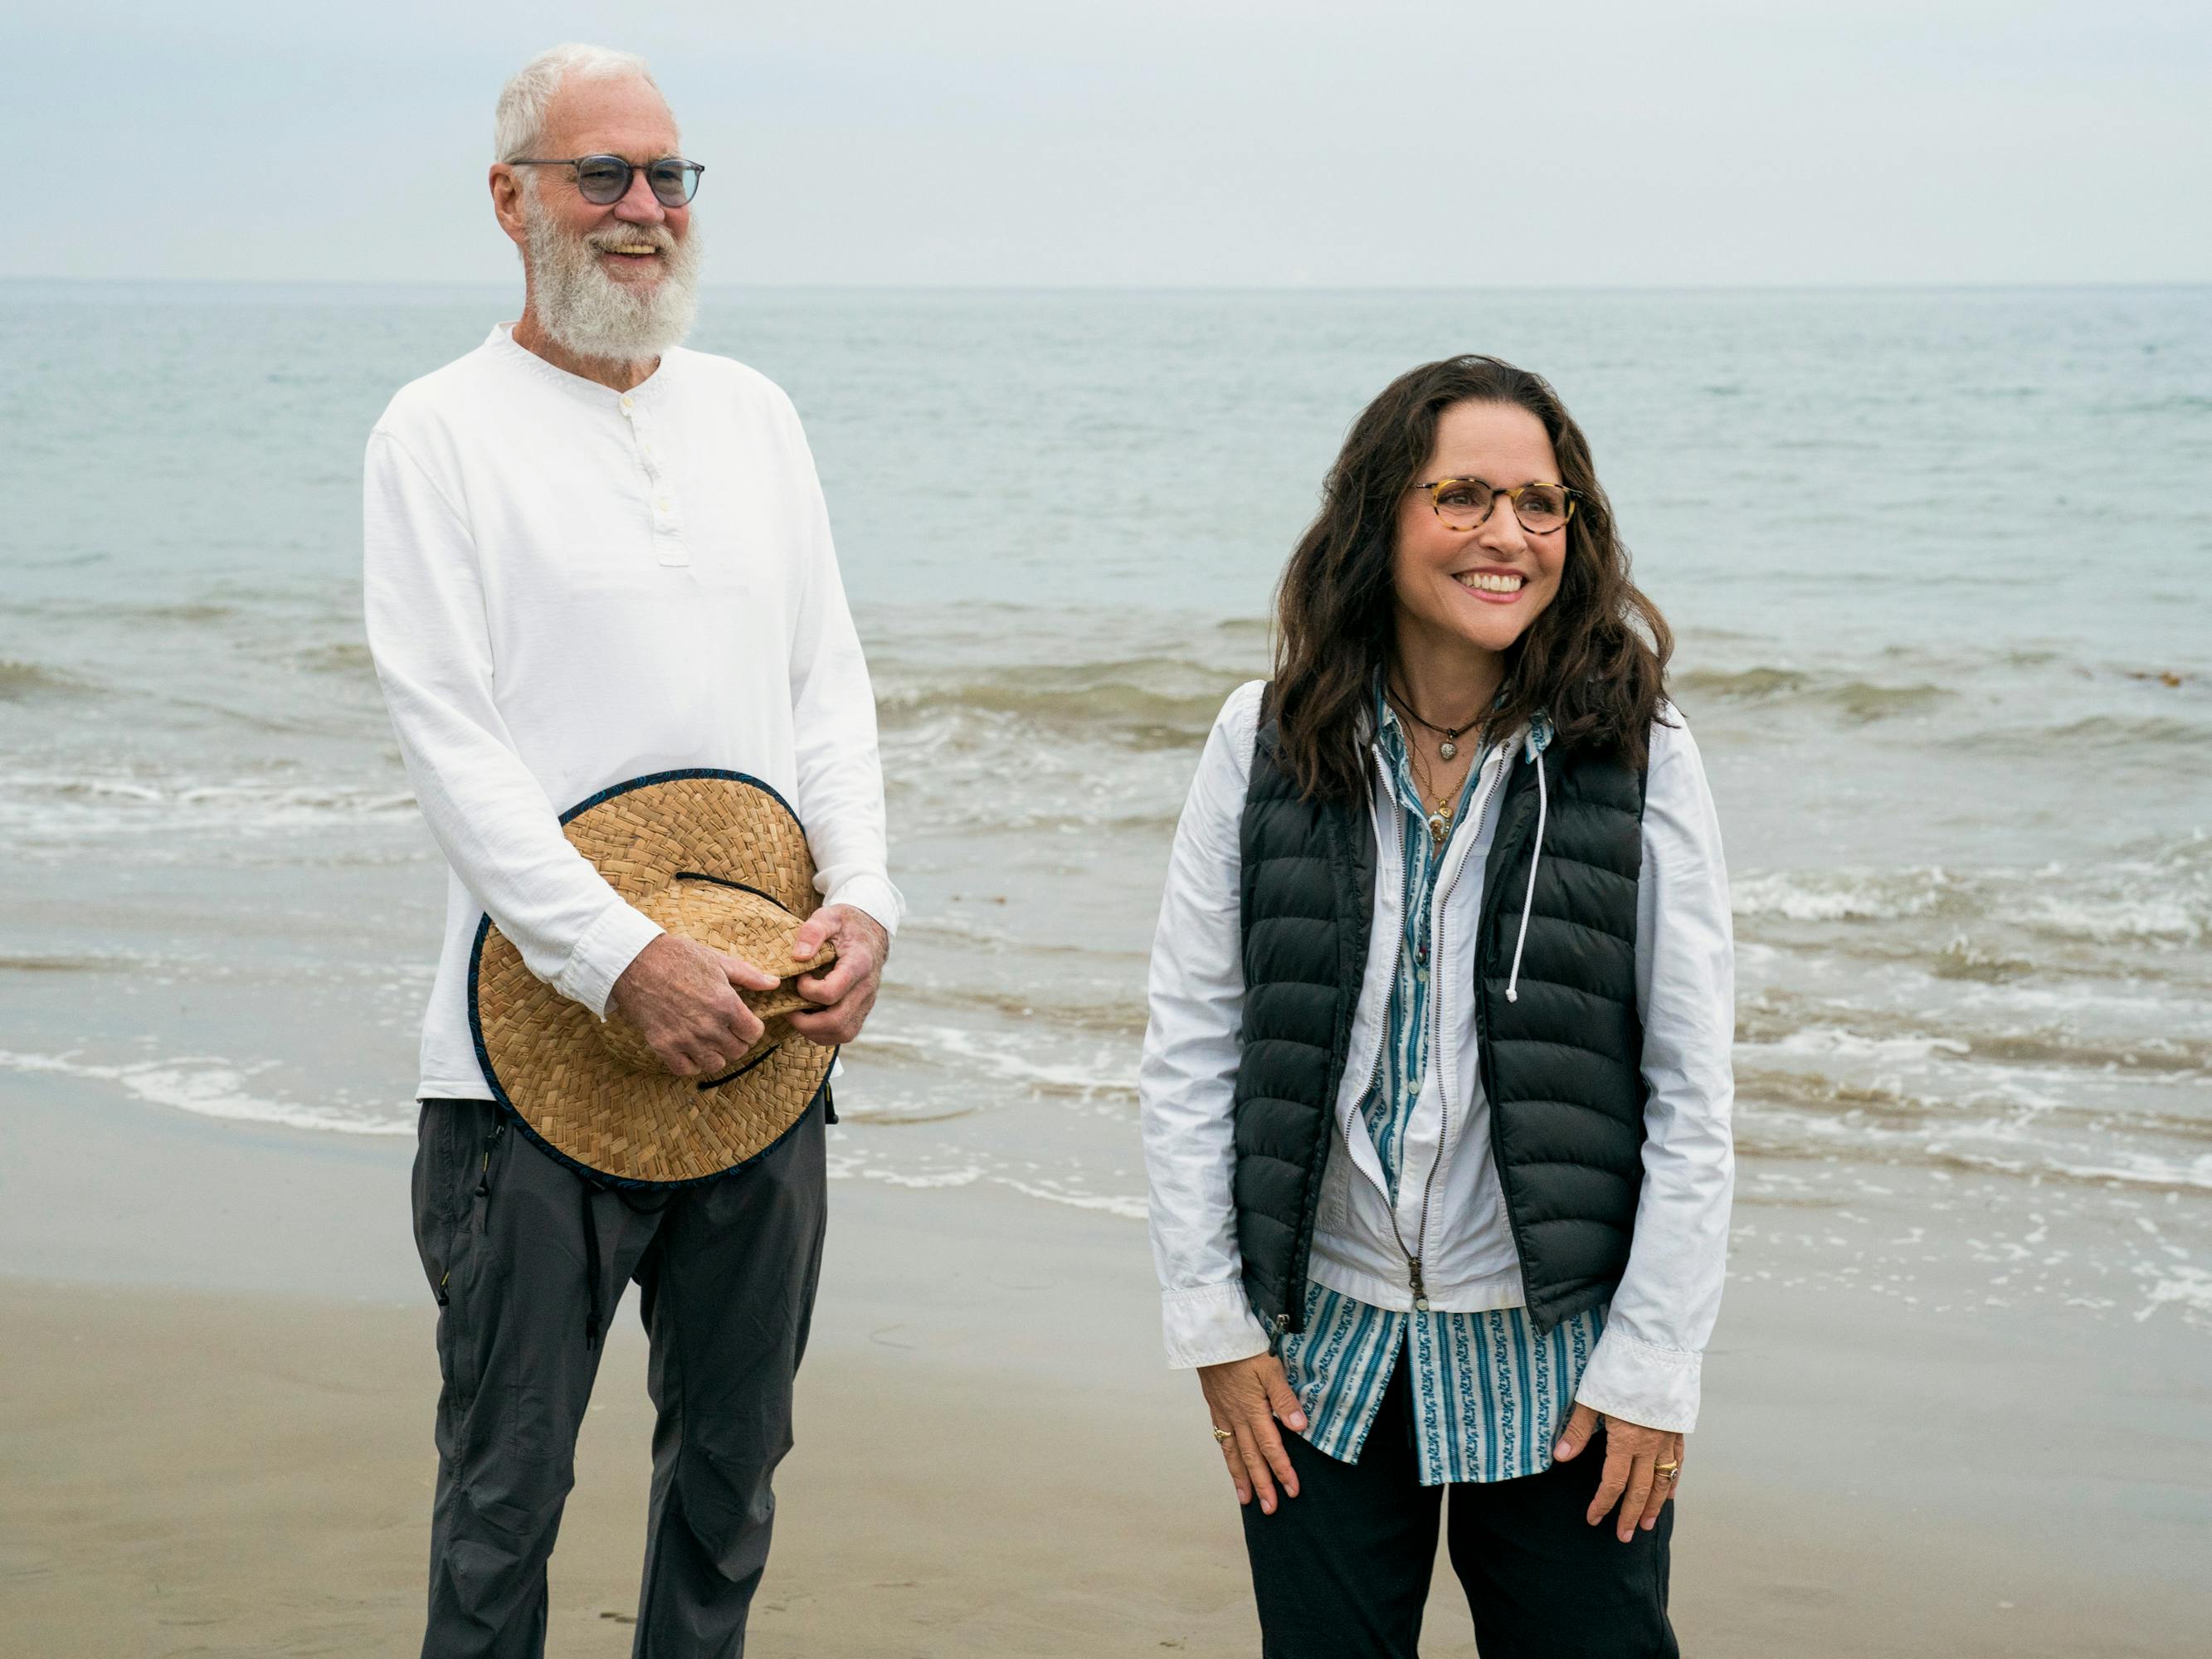 David Letterman and Julia Louis-Dreyfus stand on a beach smiling. Letterman wears a white shirt, dark pants, and a tan hat. Julia wears  a puffer vest, sweatshirt, and glasses.